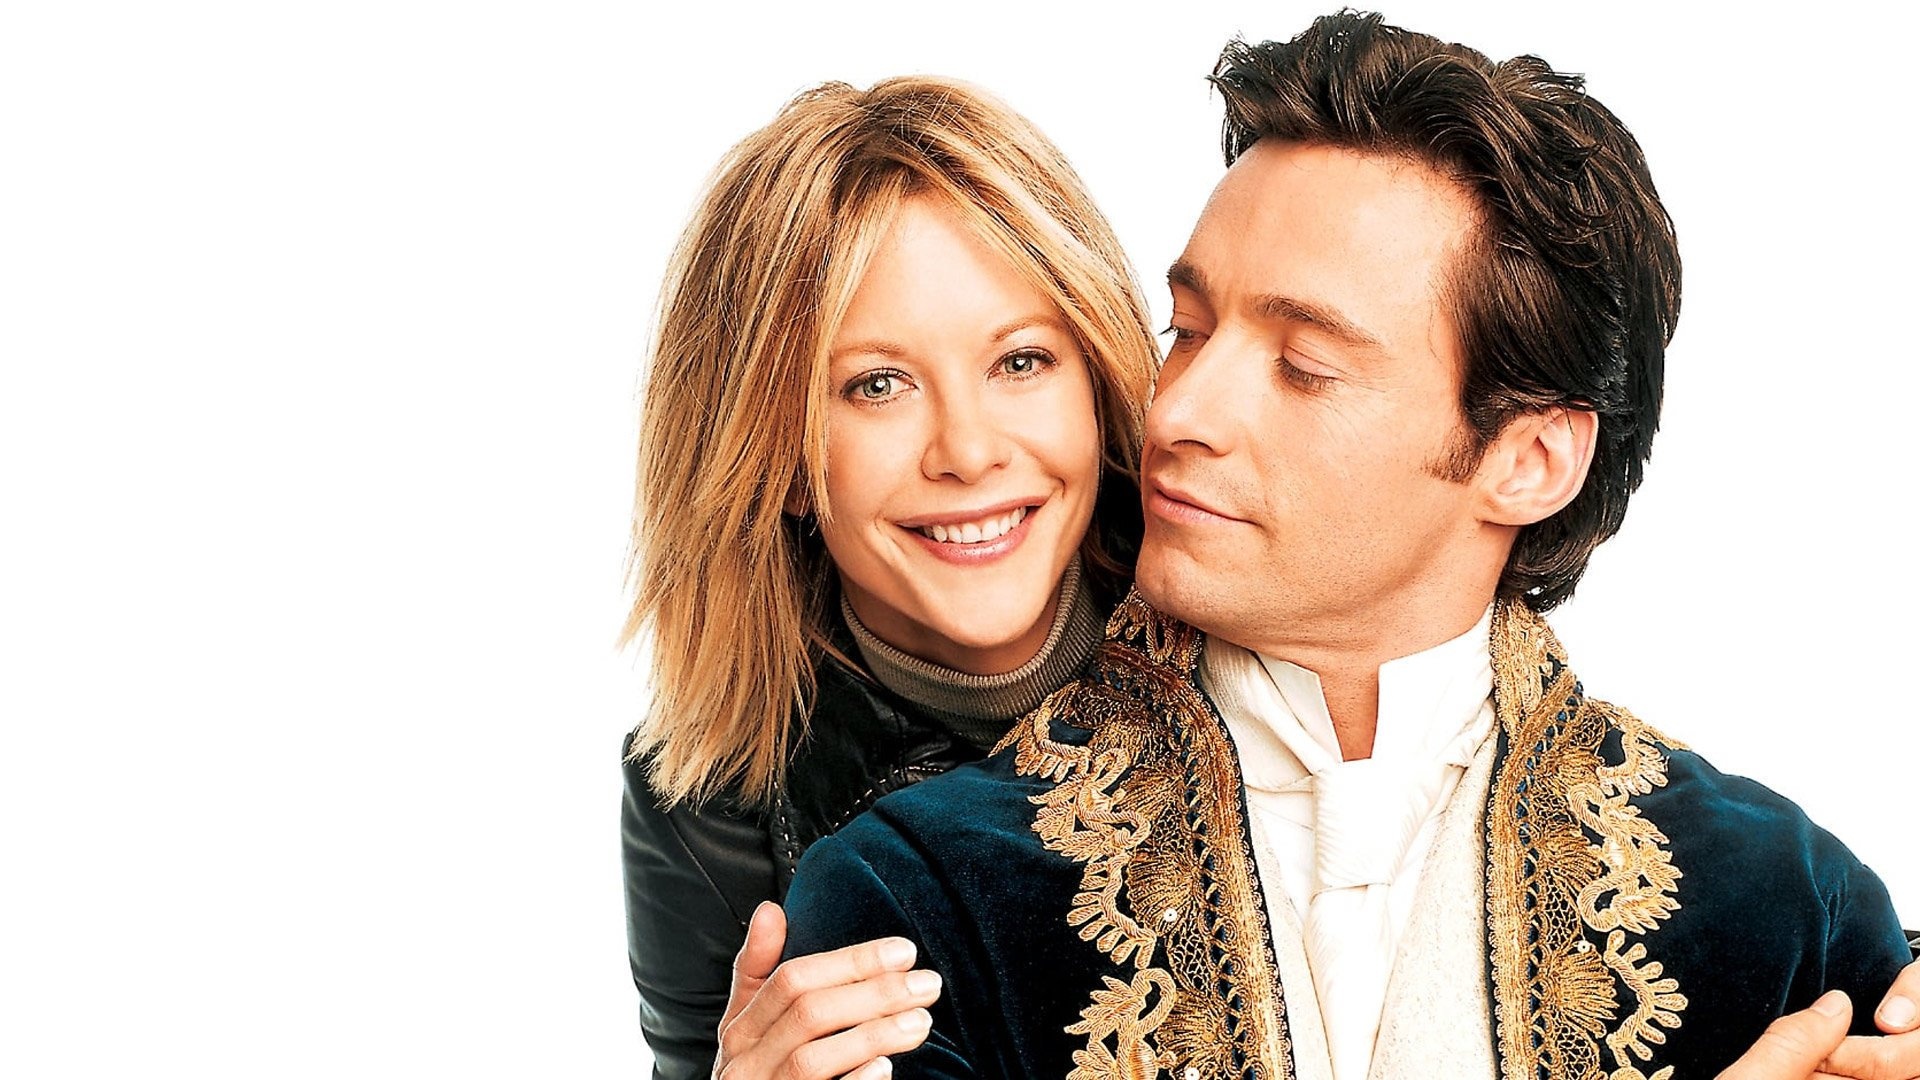 Kate and Leopold: Hugh Jackman was nominated for a Golden Globe for his role in the movie. 1920x1080 Full HD Wallpaper.